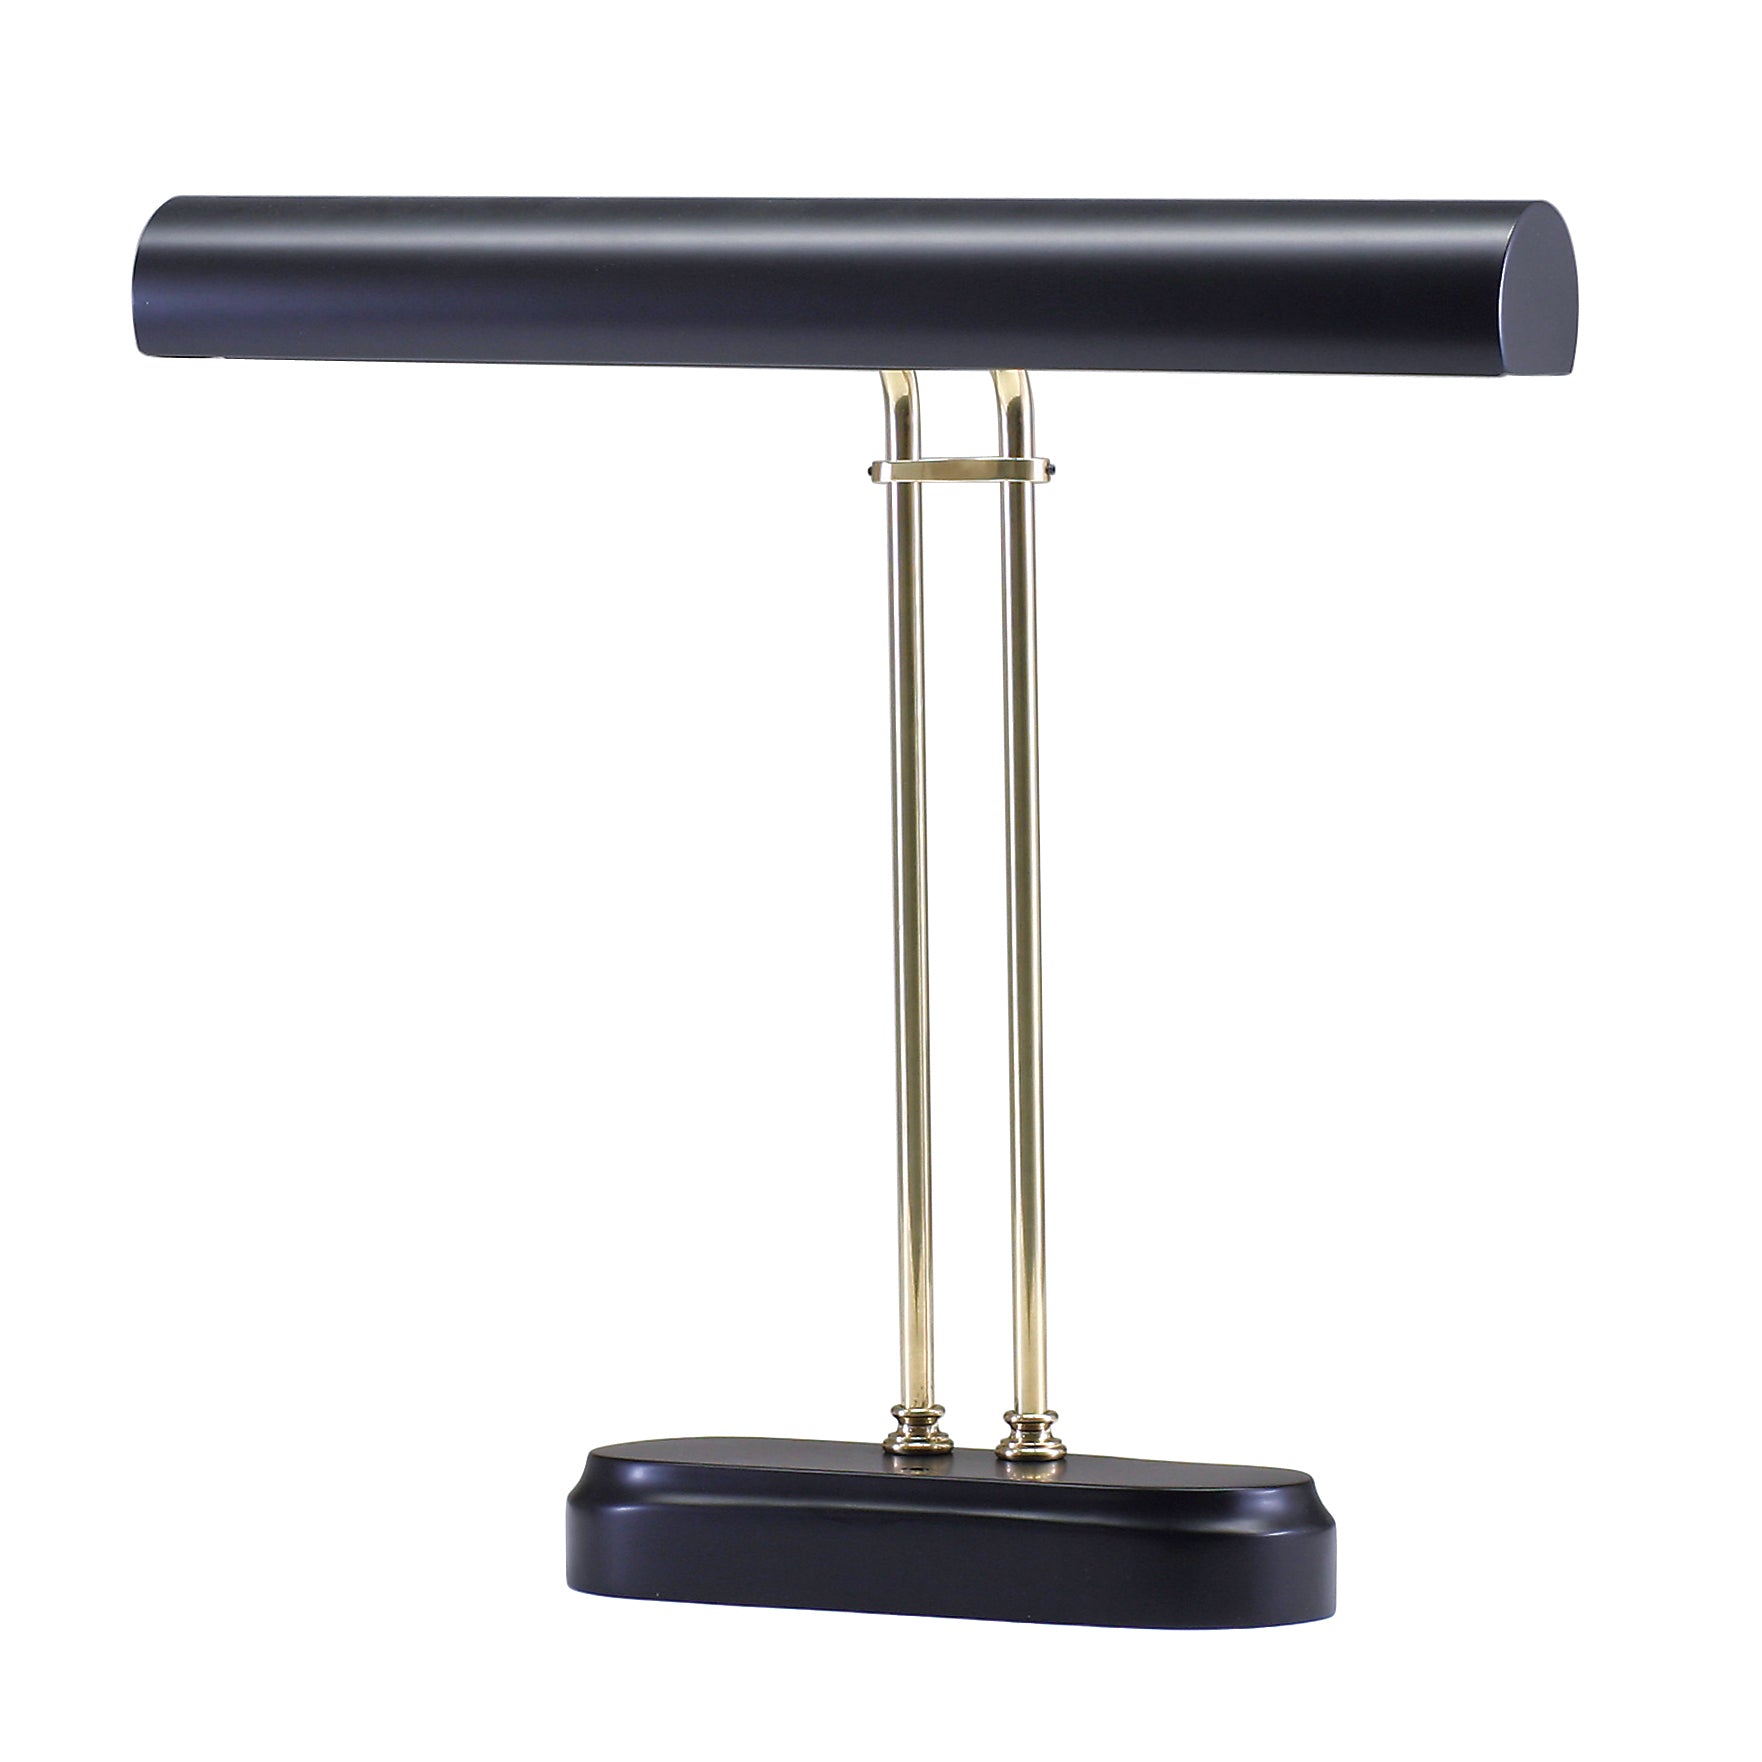 House of Troy Digital Piano Lamp 16" Black with Polished Brass Accents P16-D02-617